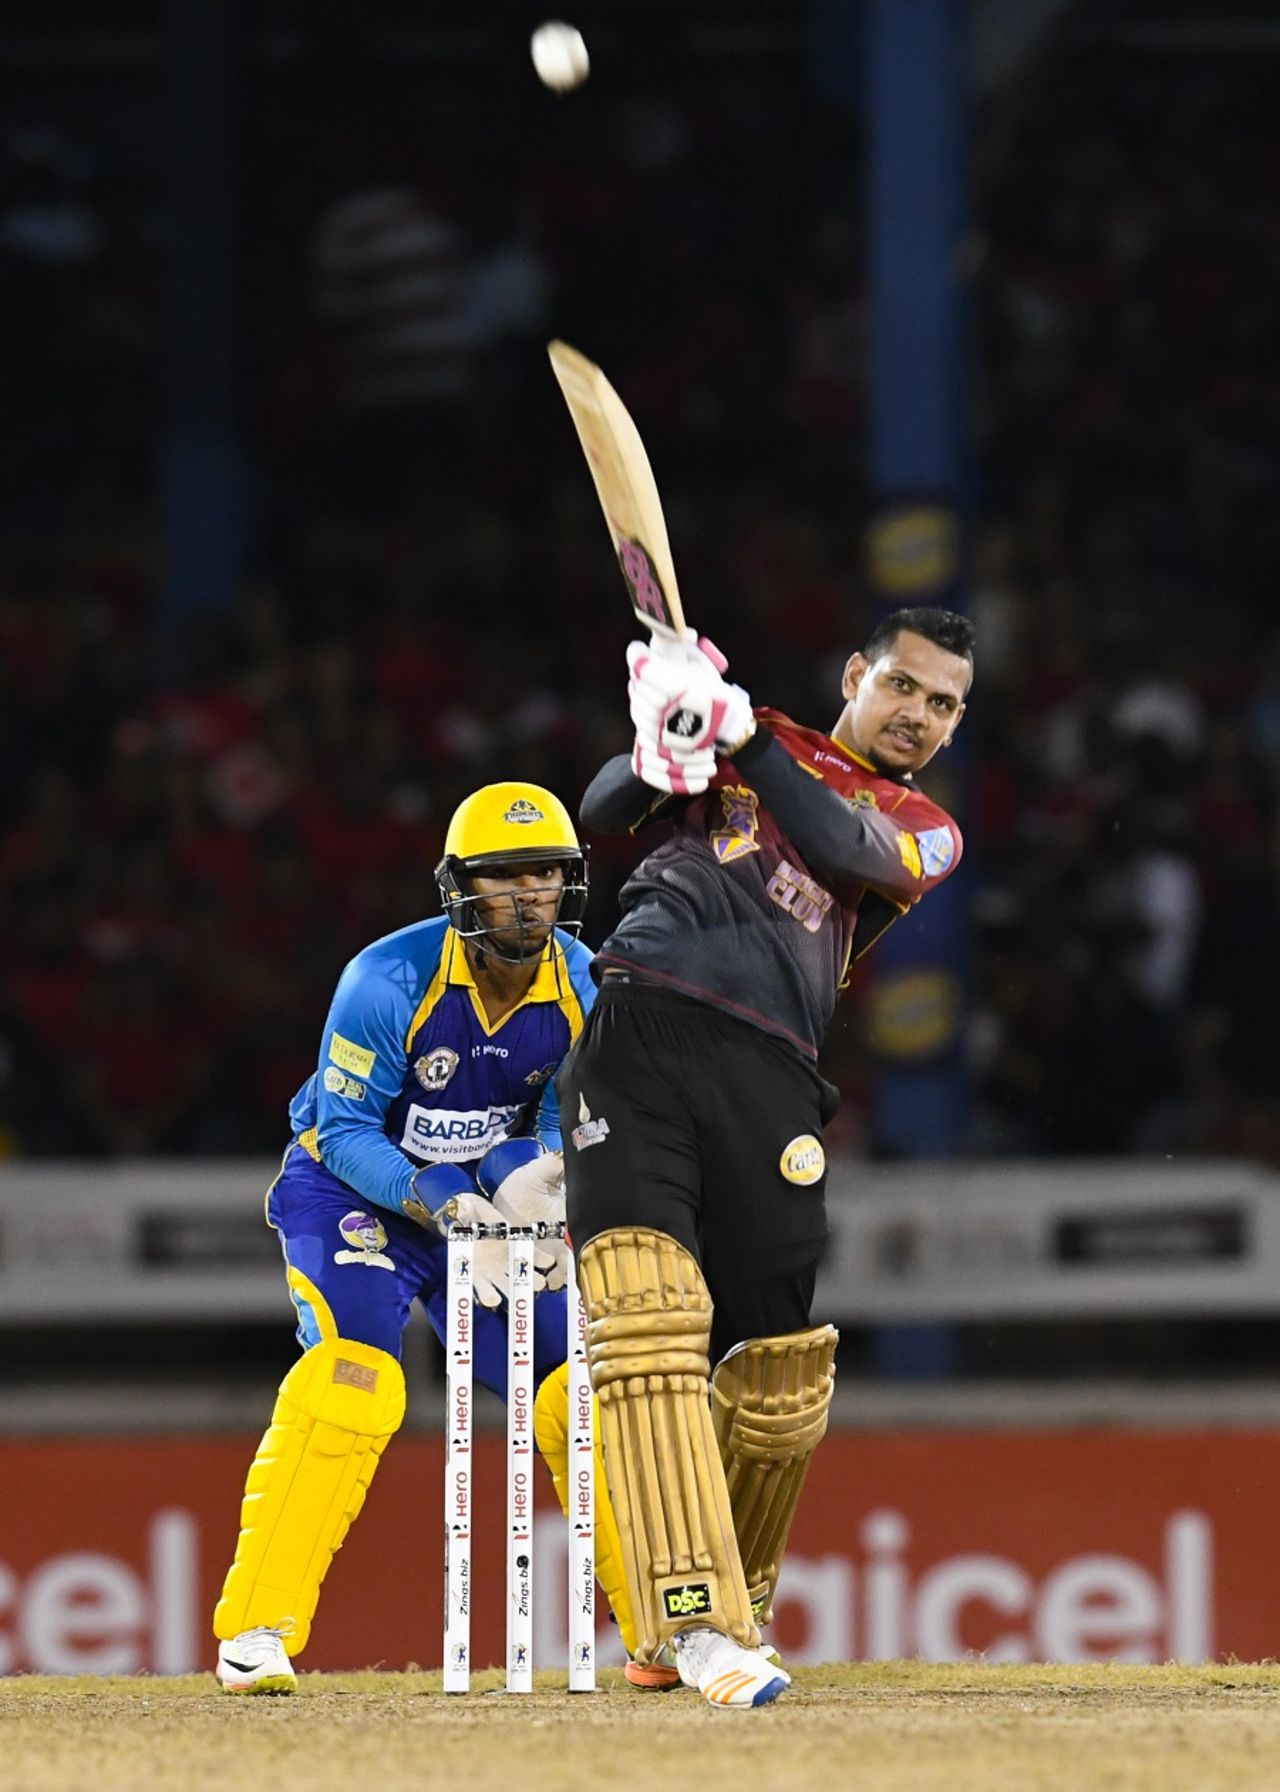 Sunil Narine waltzed to his career-best T20 score, Barbados Tridents v Trinbago Knight Riders, CPL 2017, Port of Spain, August 12, 2017